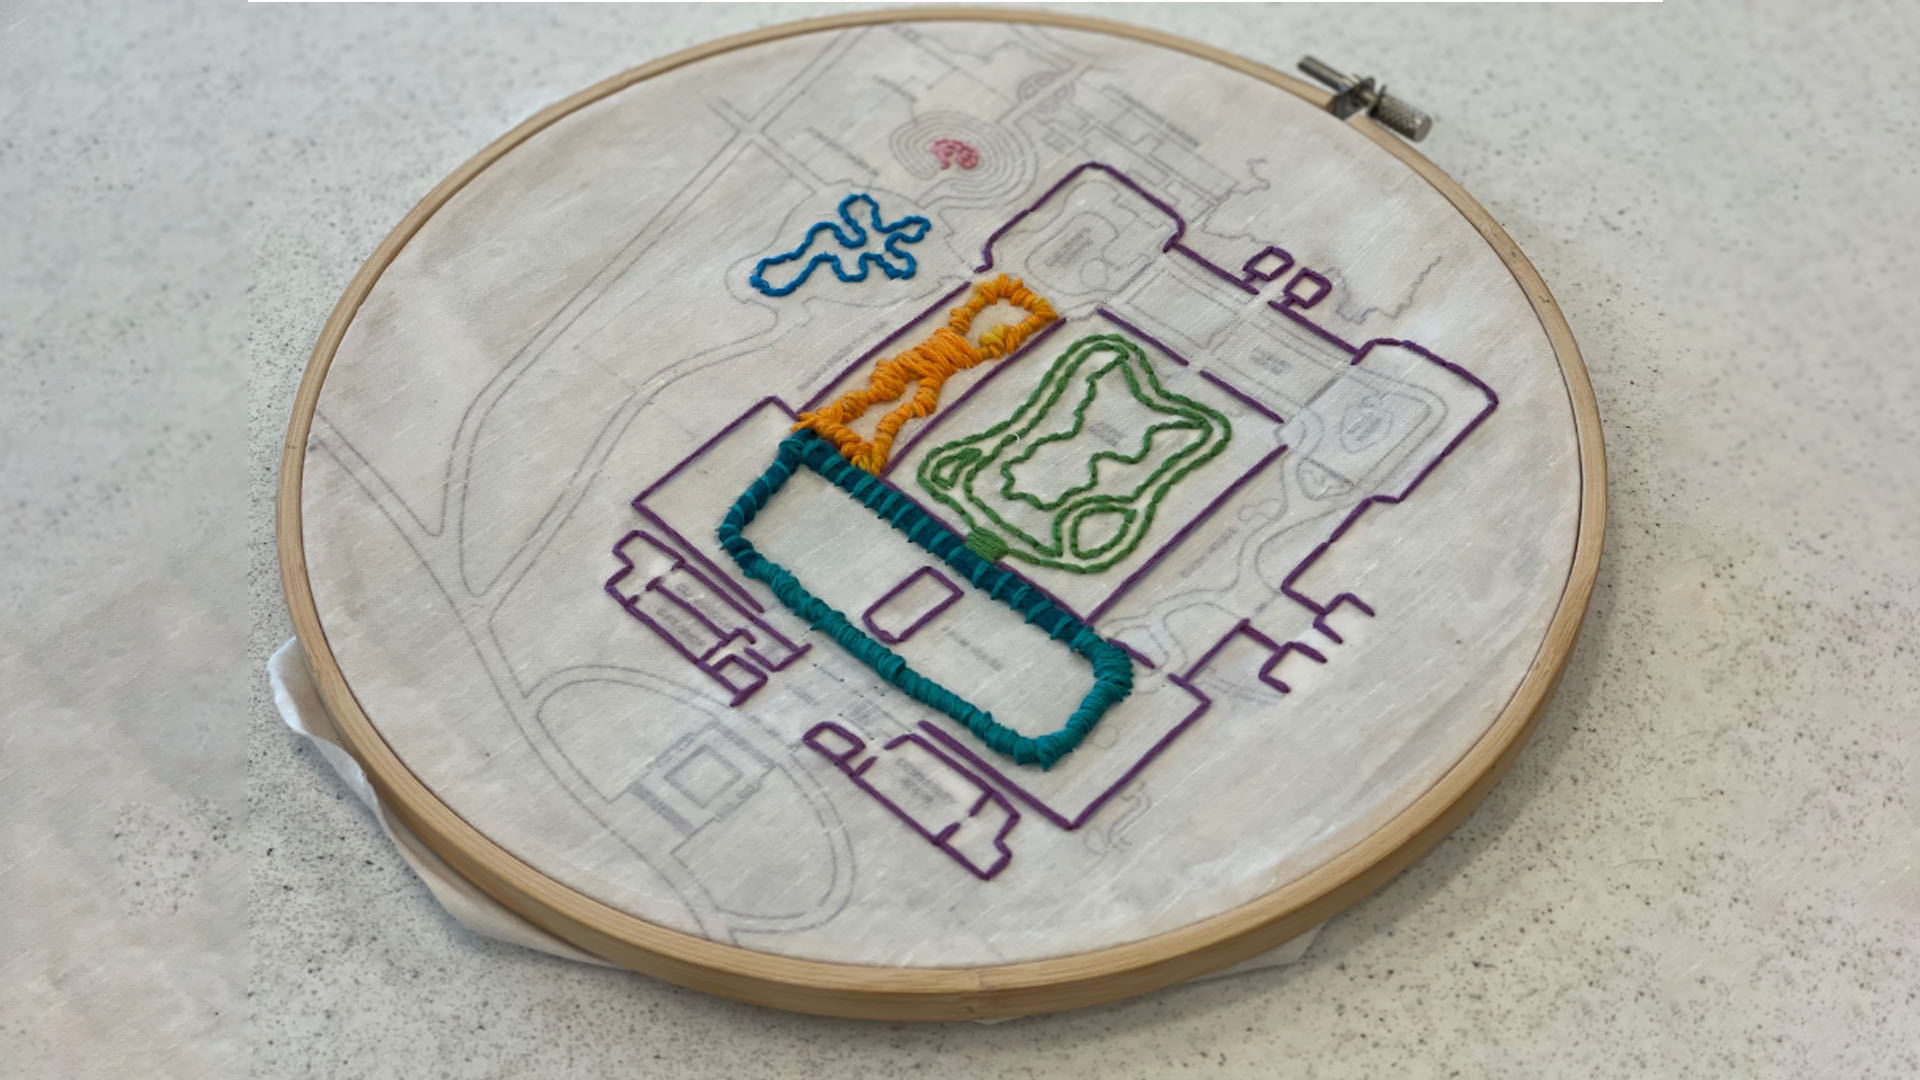 Multi-colored embroidery of a building layout.